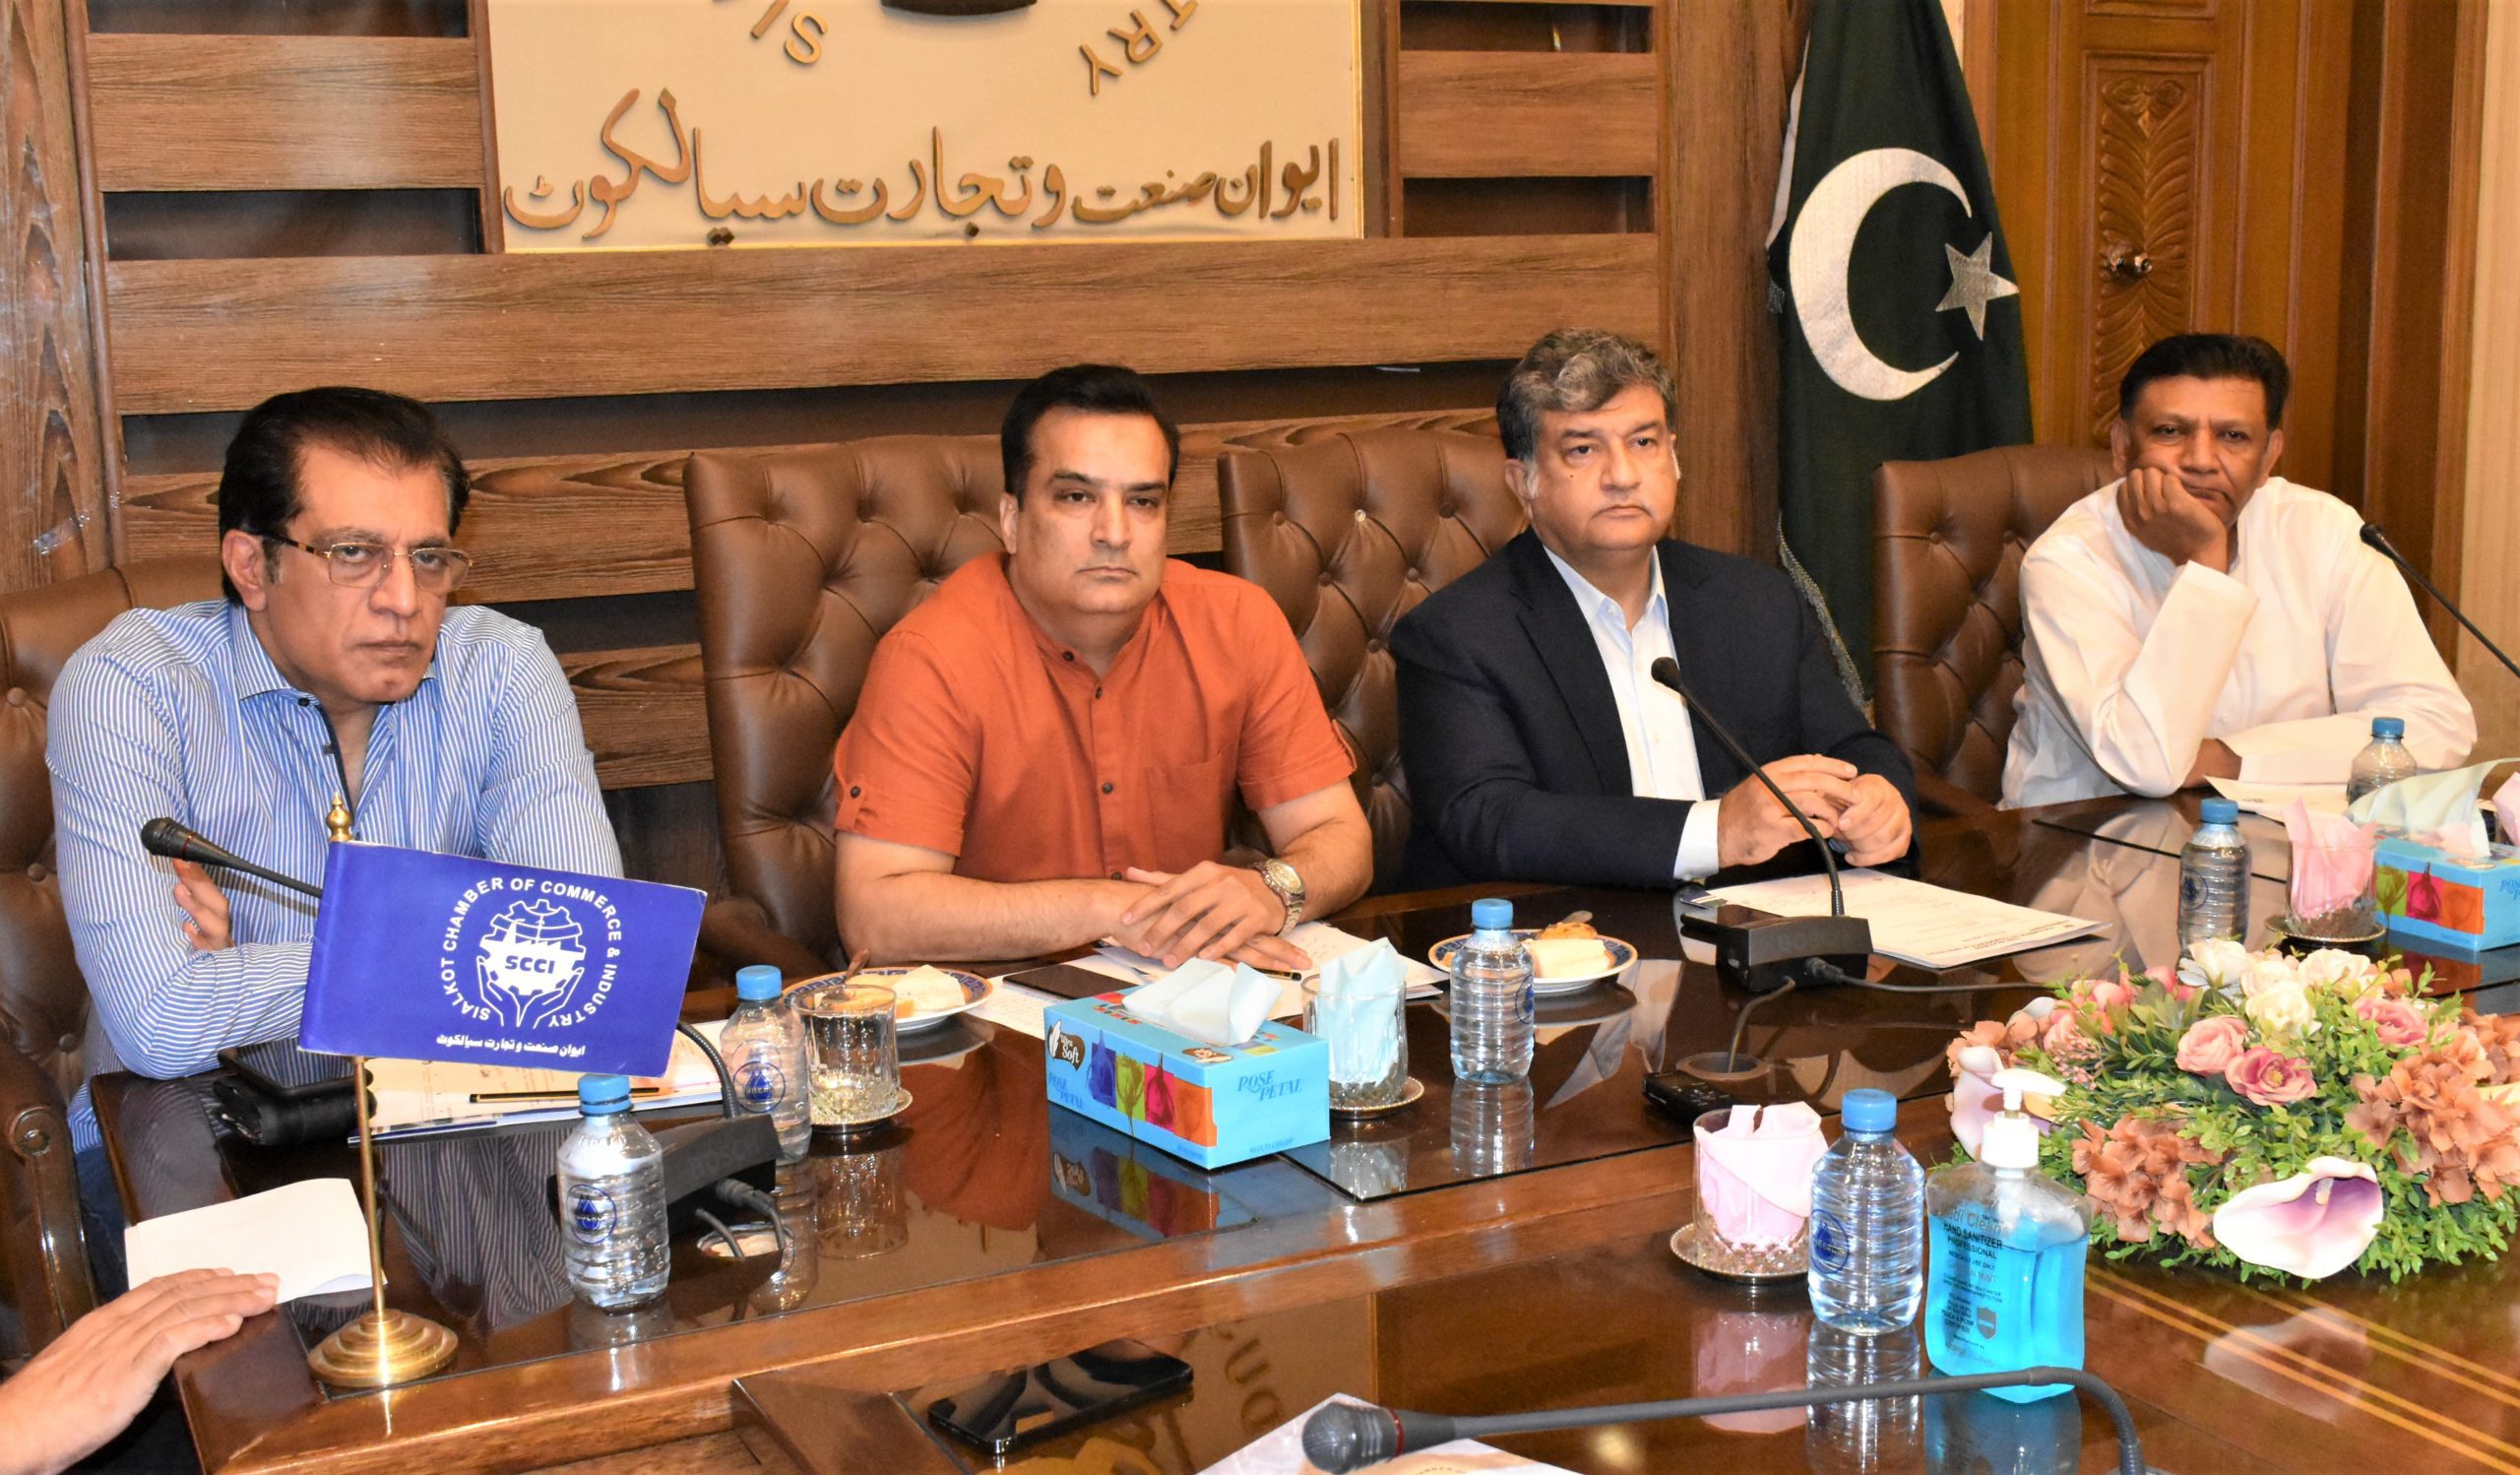 On May 19, 2022, Mian Imran Akbar, President Sialkot Chamber chaired the meeting of SCCI Sub-Committee on the Delivery of Fortnightly Bulletin to discuss the issue related to Sialkot Chamber Fortnightly Bulletin.